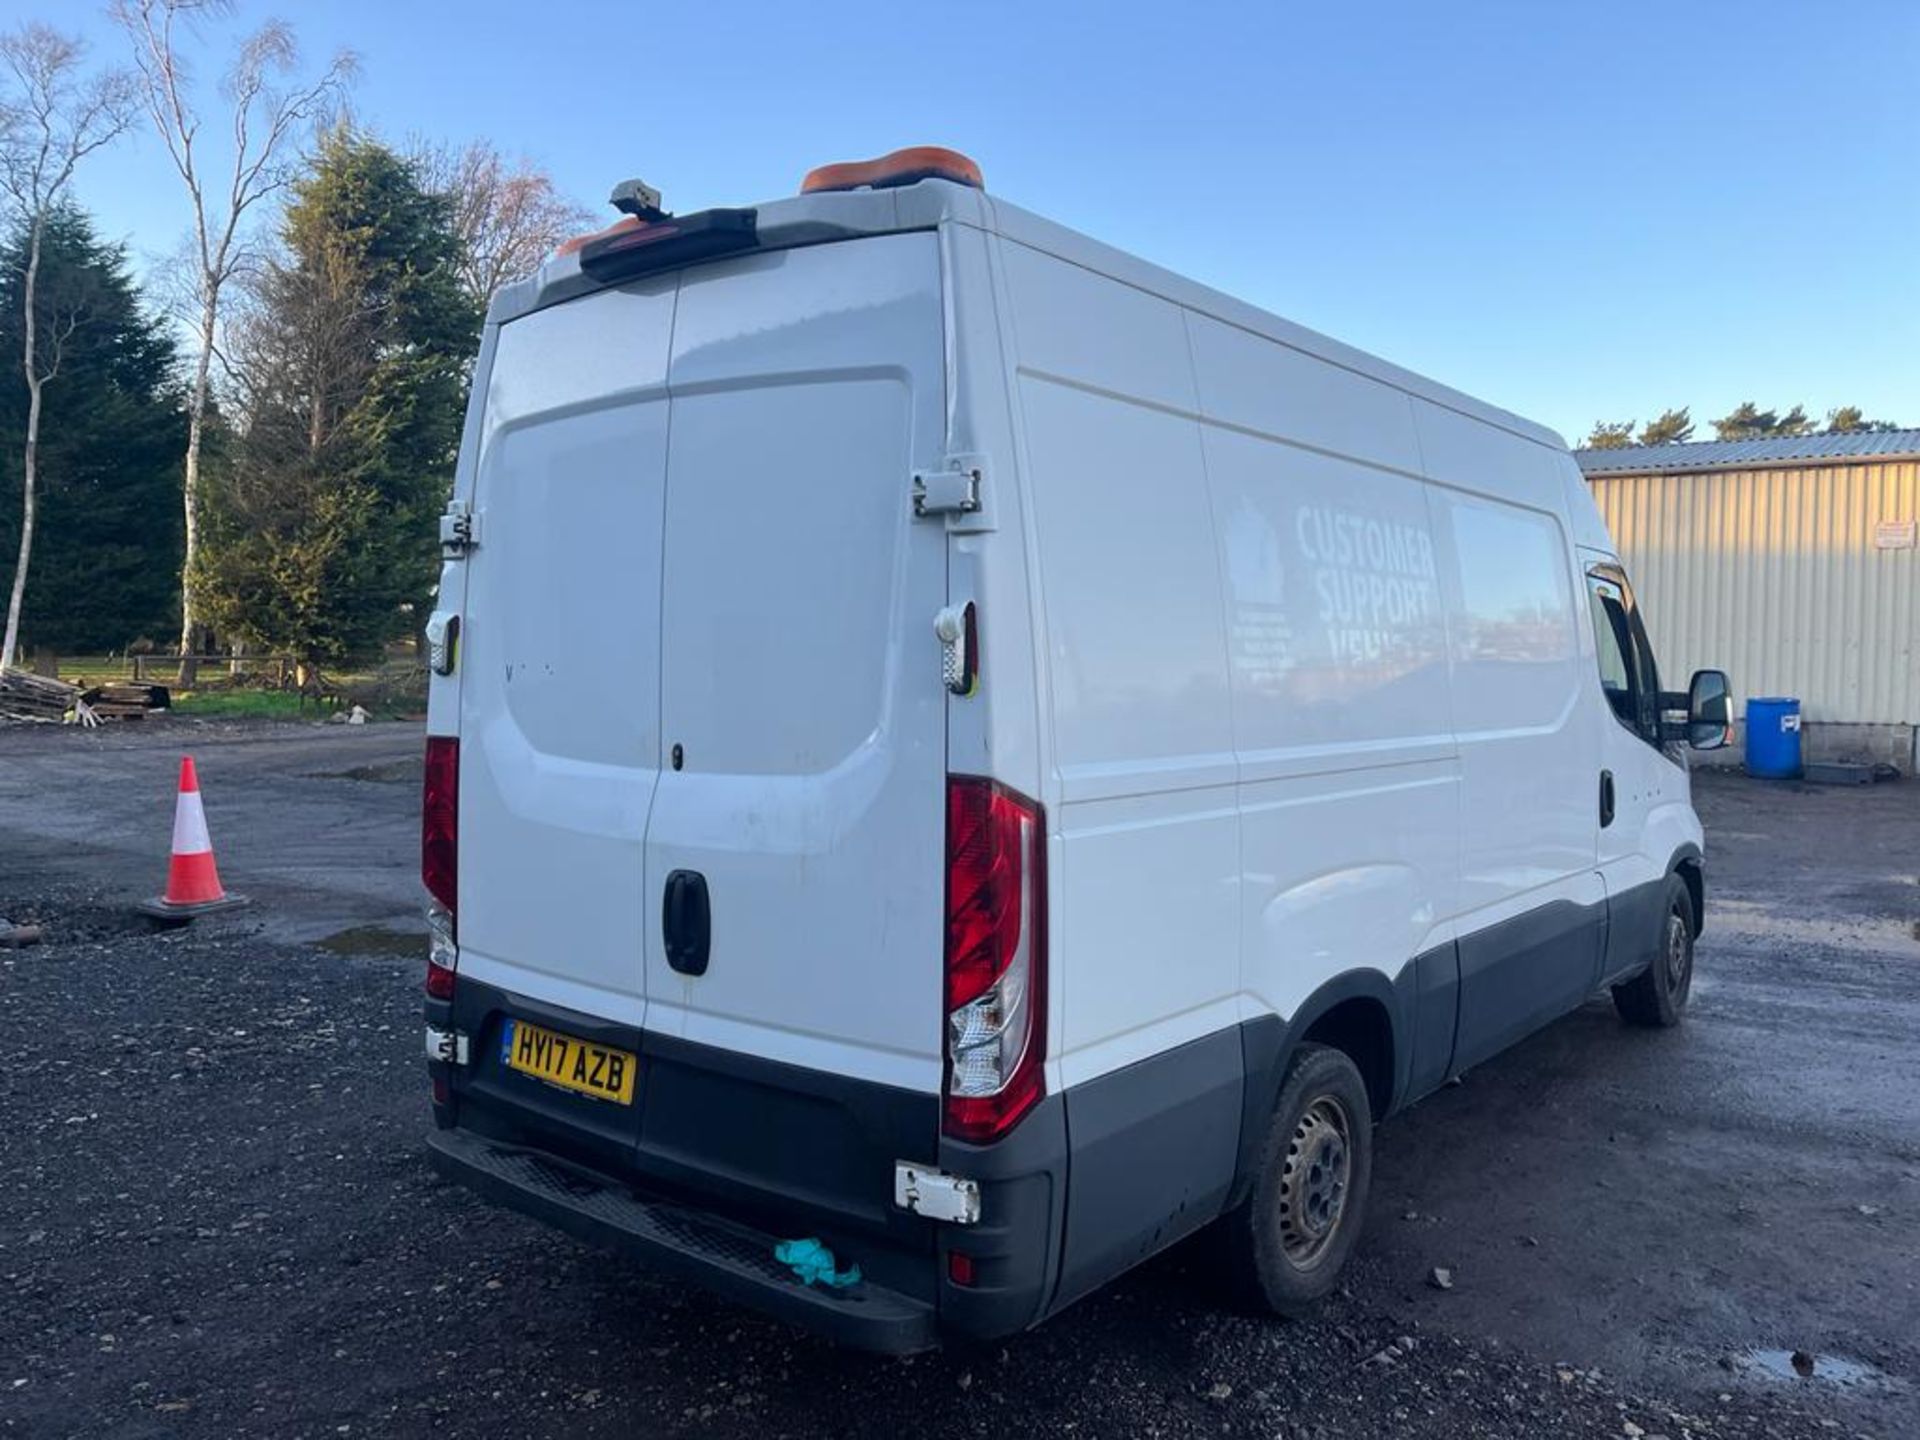 2017 Iveco daily mwb workshop van - Pto driven arc welder and 110v plug and 12v and 24v jump point - Image 7 of 11